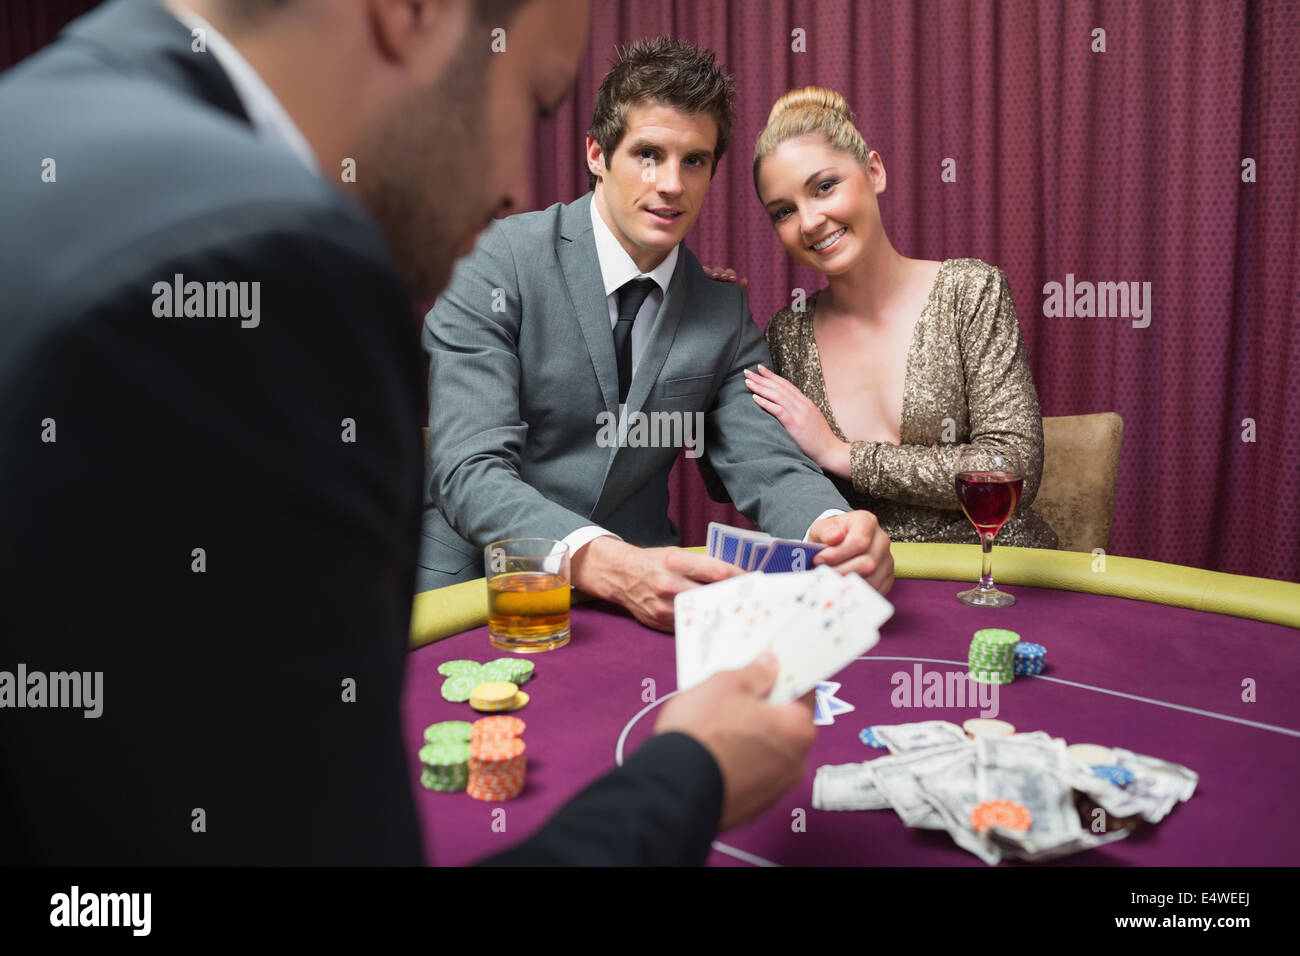 Couple playing poker and smiling Stock Photo